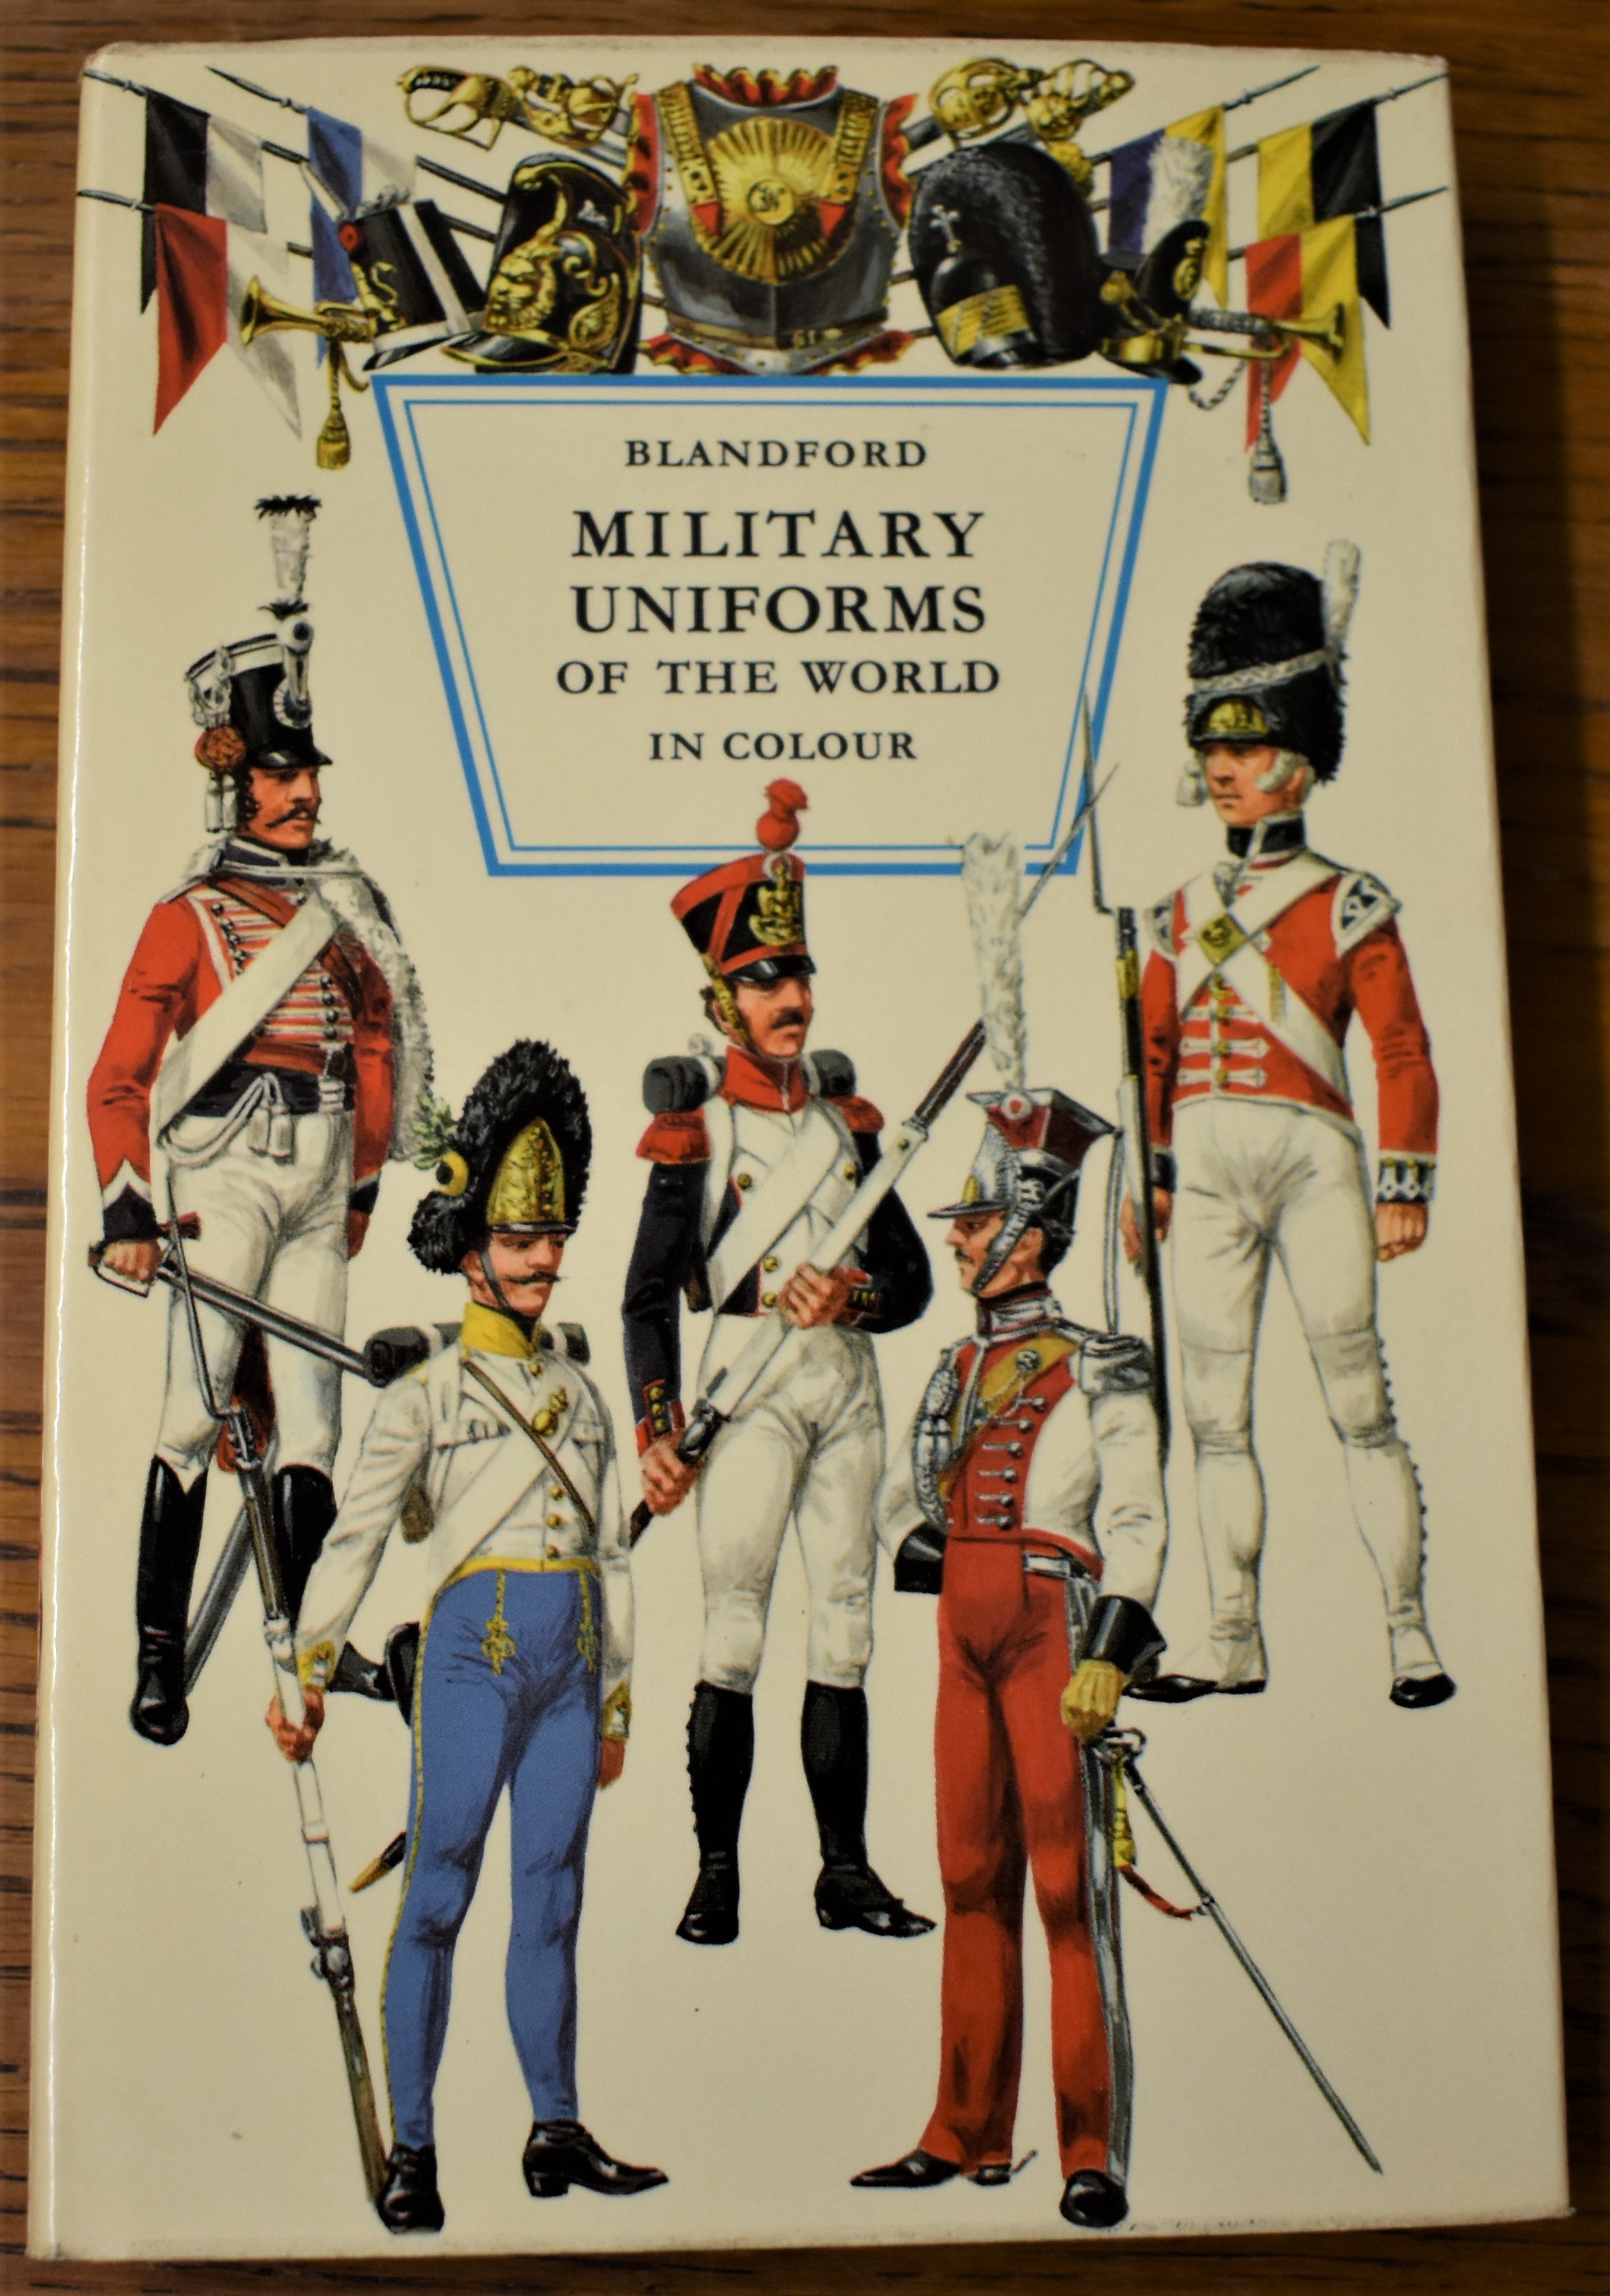 Military Uniforms of the World in Colour by Blandford, written by Preben Kannik.